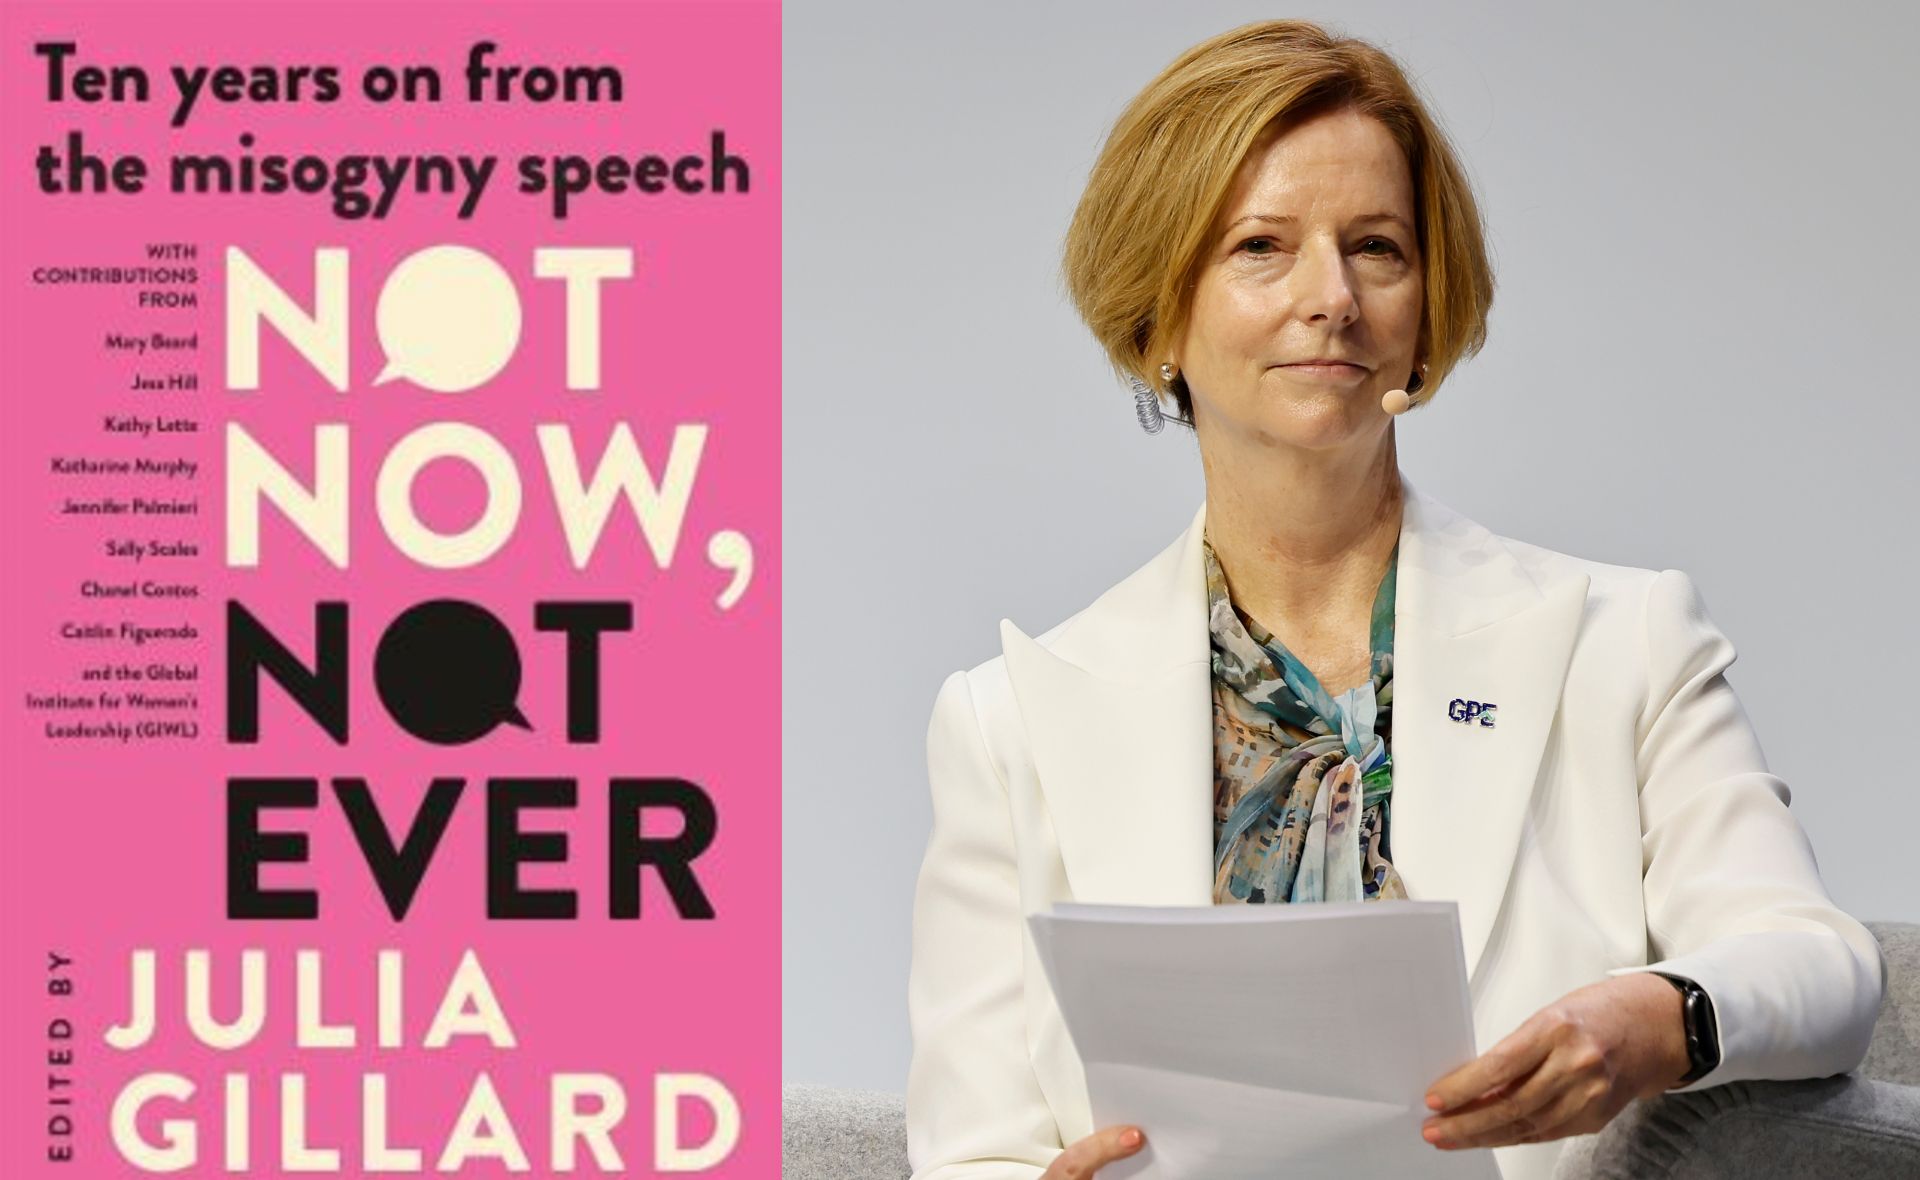 10 years on from her iconic misogyny speech, former Prime Minister Julia Gillard is releasing a book all about it